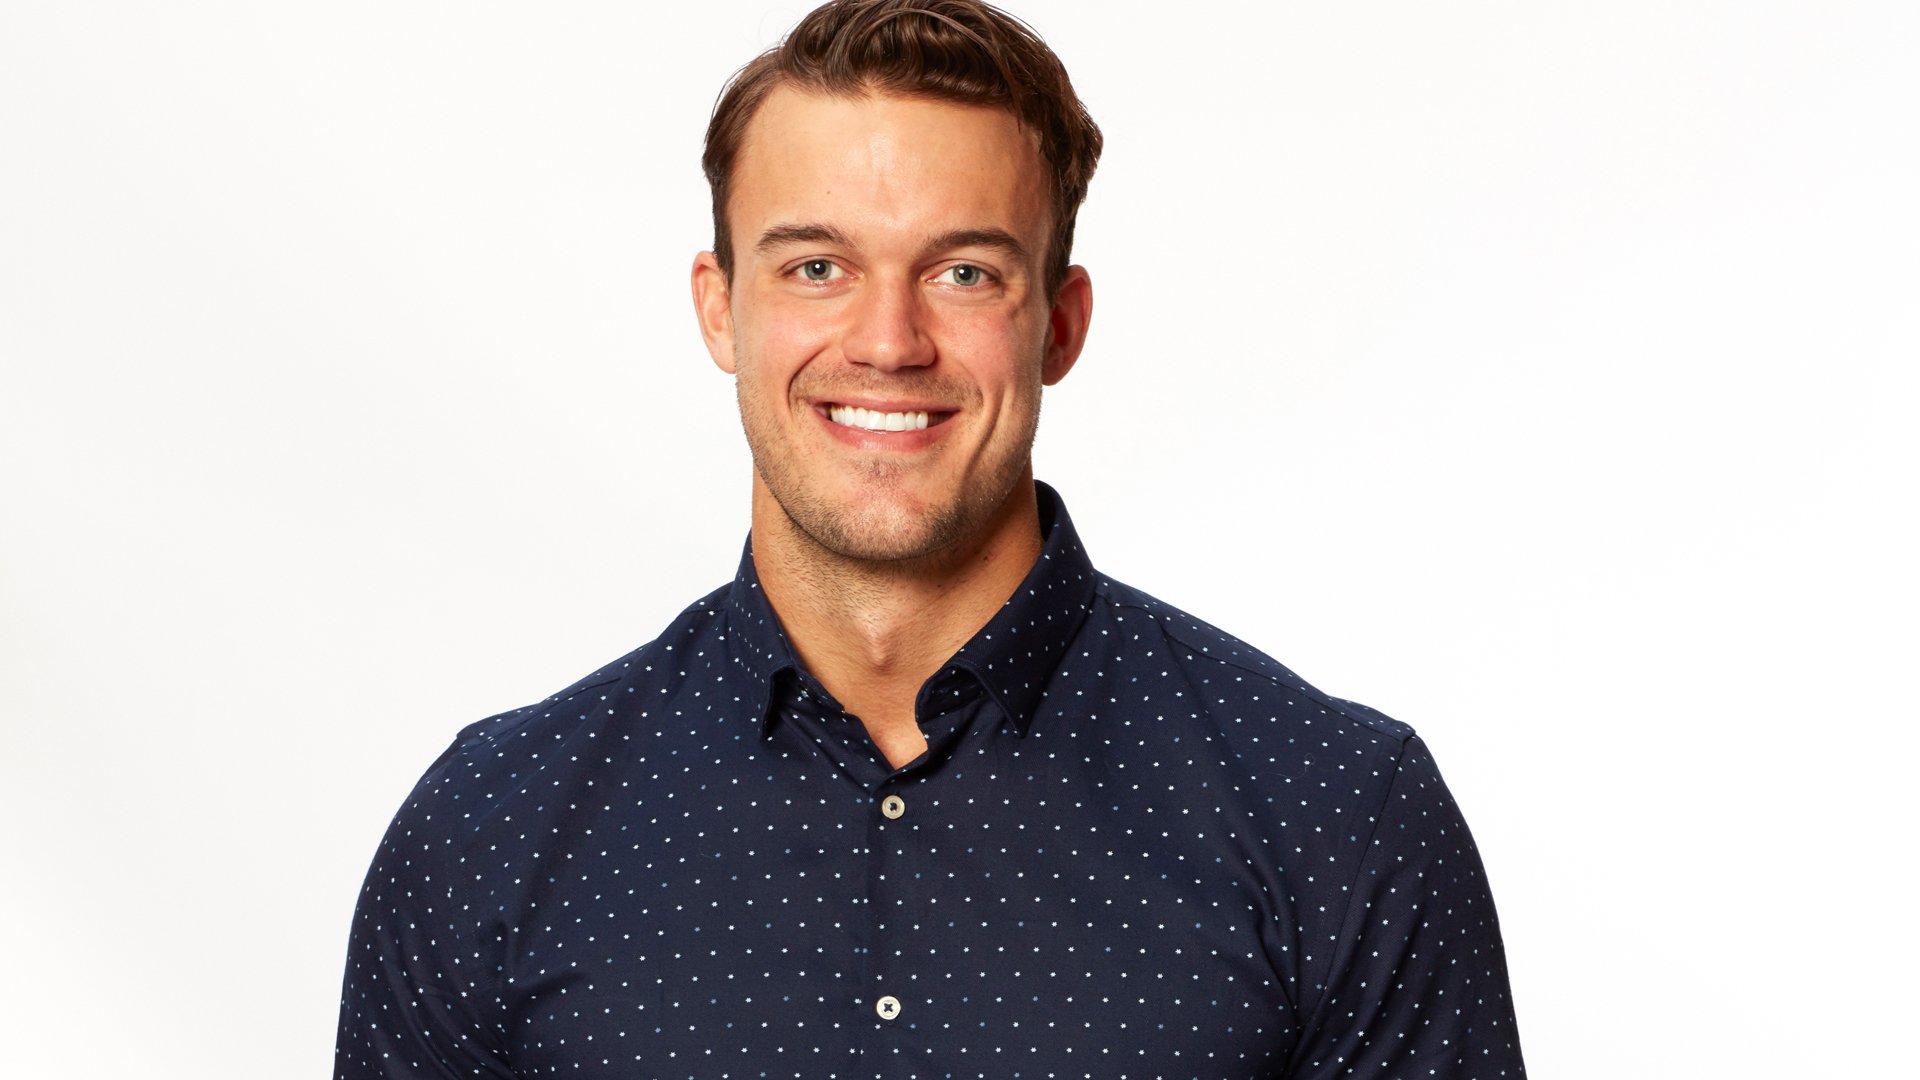 Ben Smith from 'The Bachelorette' 2020